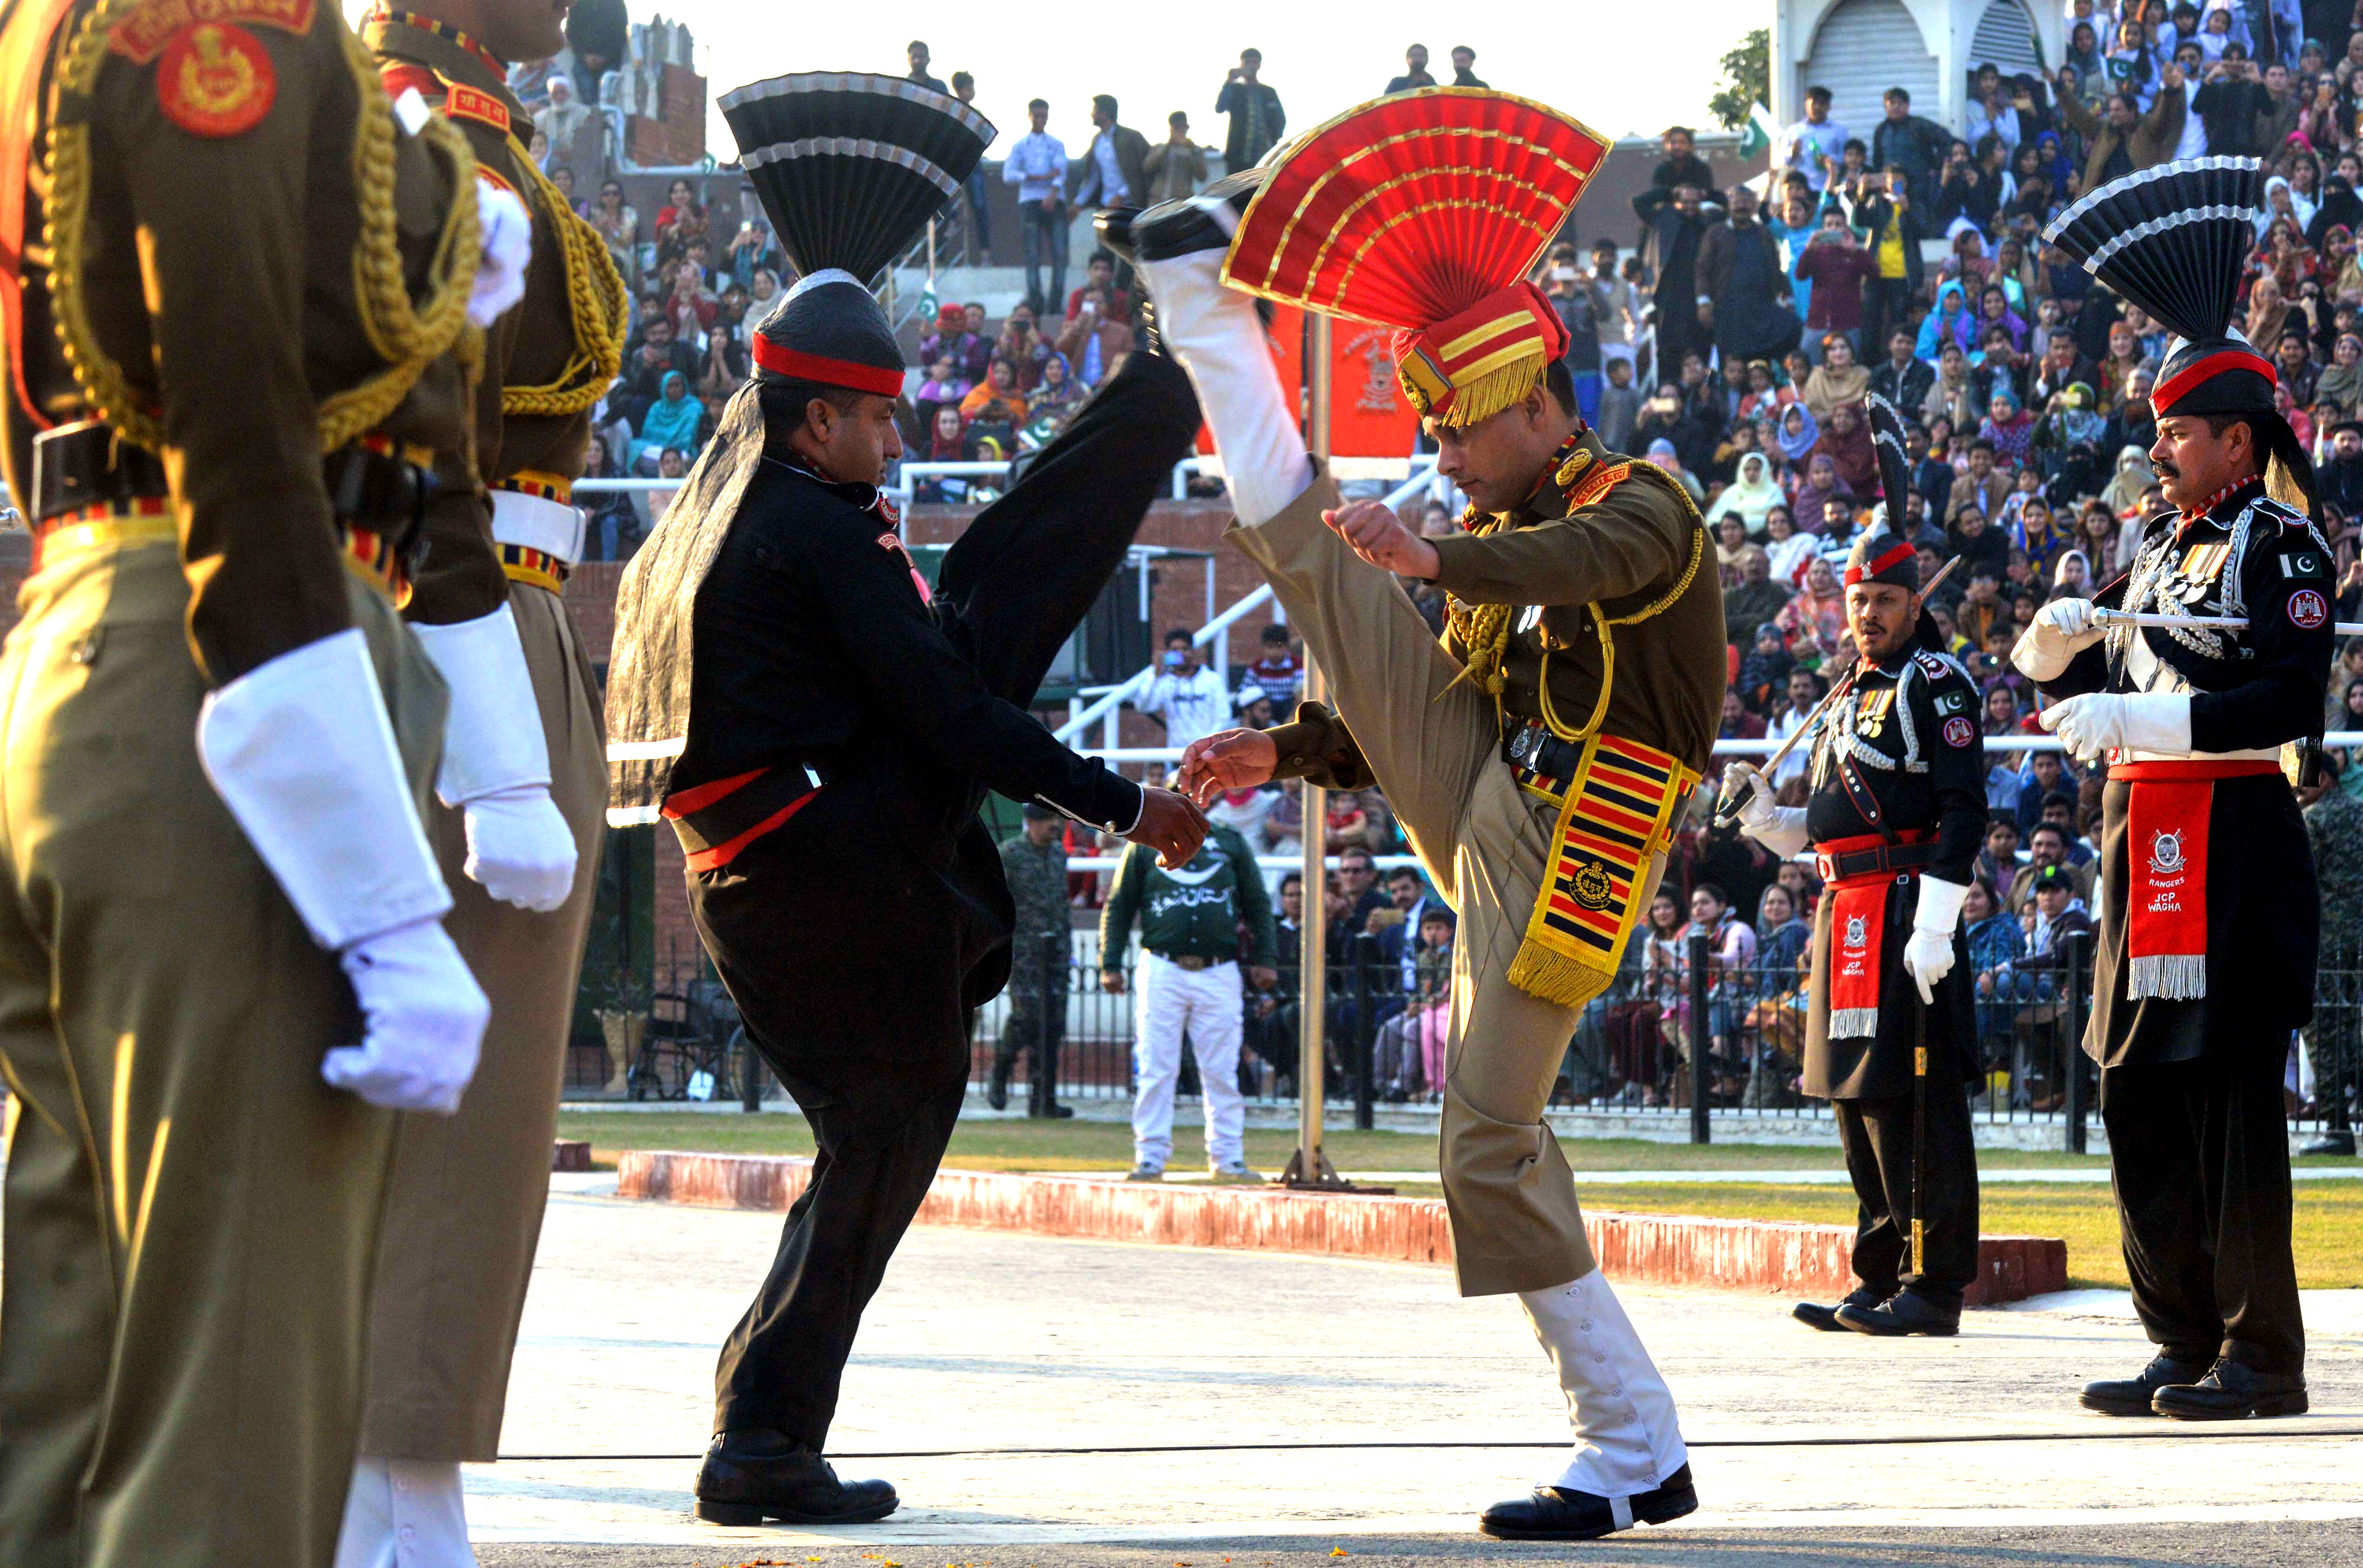 Indian Border Security Force personnel and Pakistani Rangers take part in the Beating Retreat ceremony during the Republic Day celebrations at the India-Pakistan Wagah border post on January 26, 2019. Photo: AFP